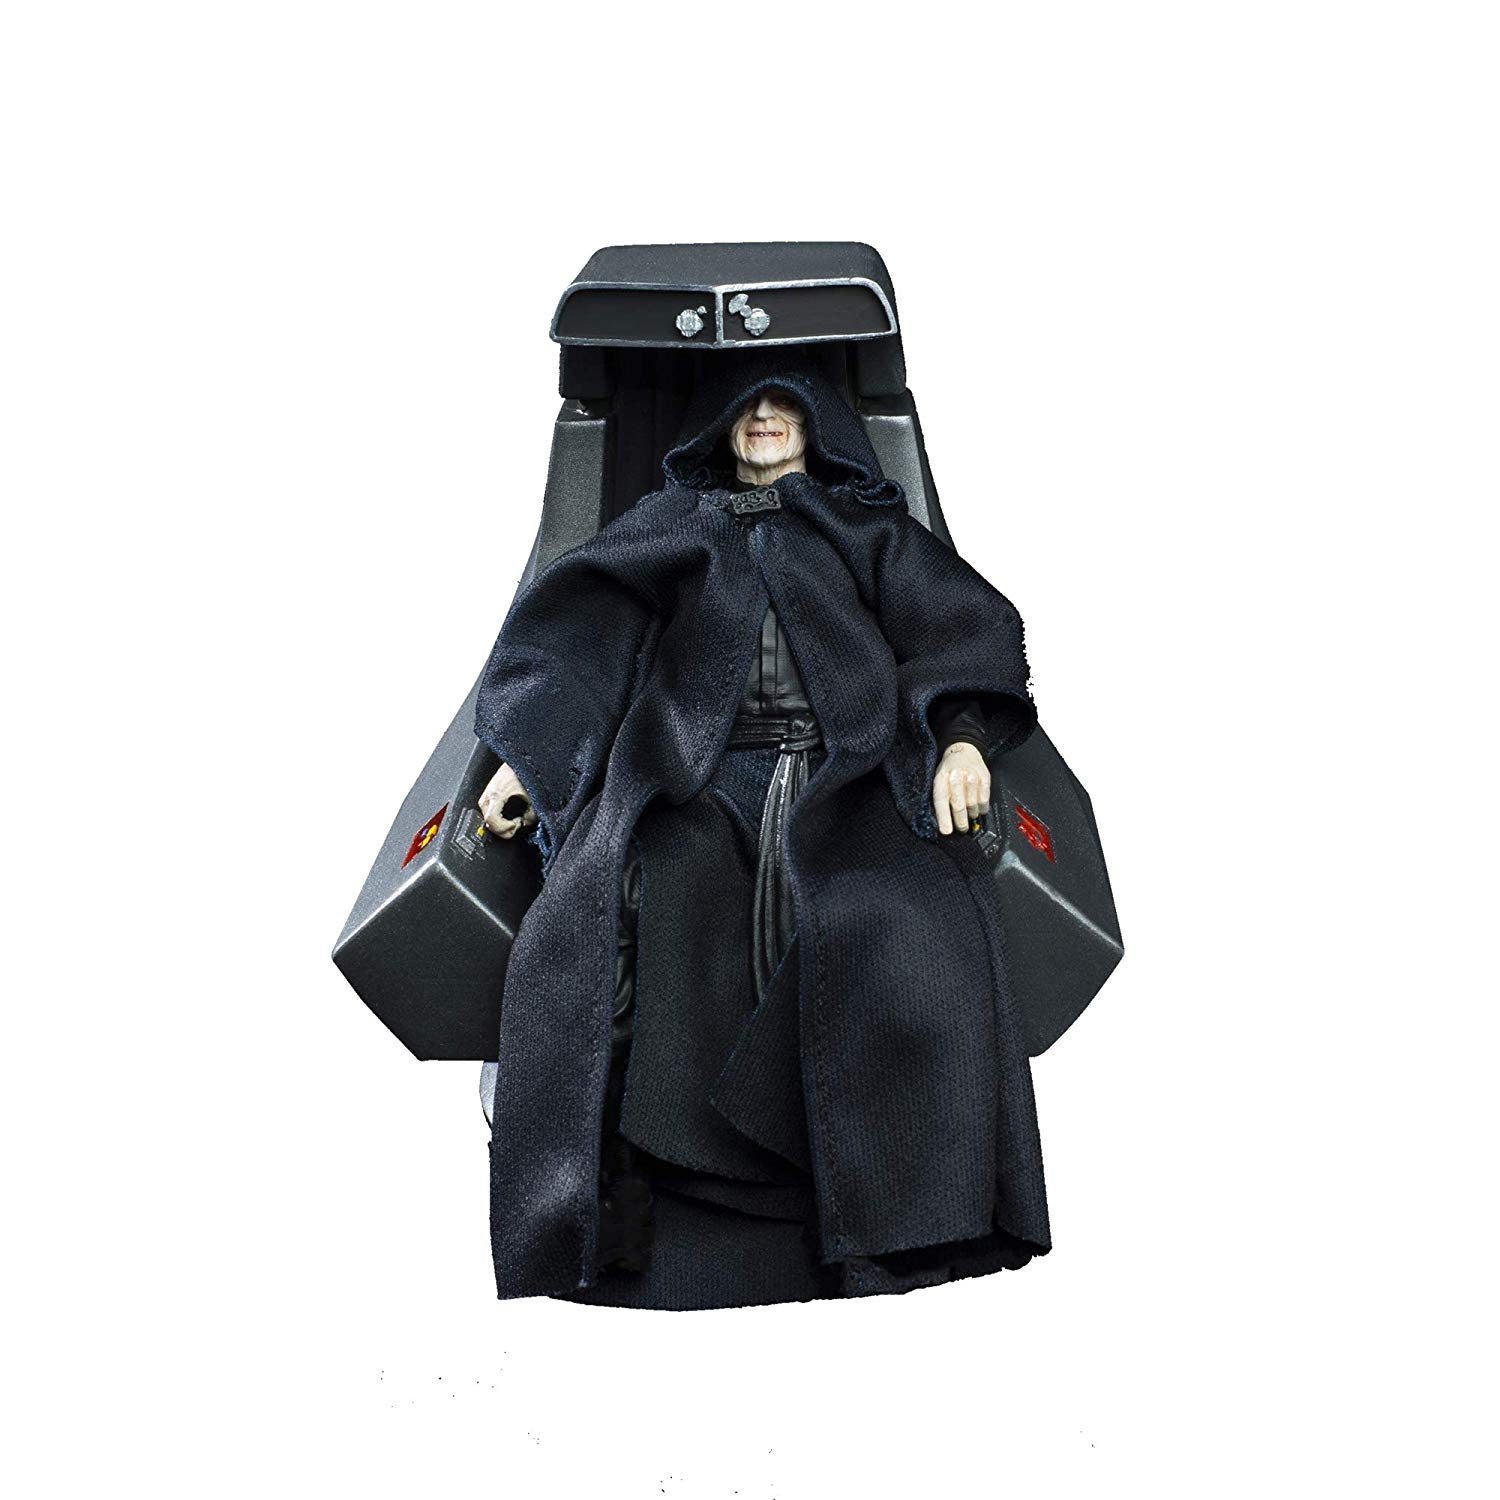 Hasbro Star Wars Black Series Emperor Palpatine With Throne Exclusive 6 Inch Action Figure